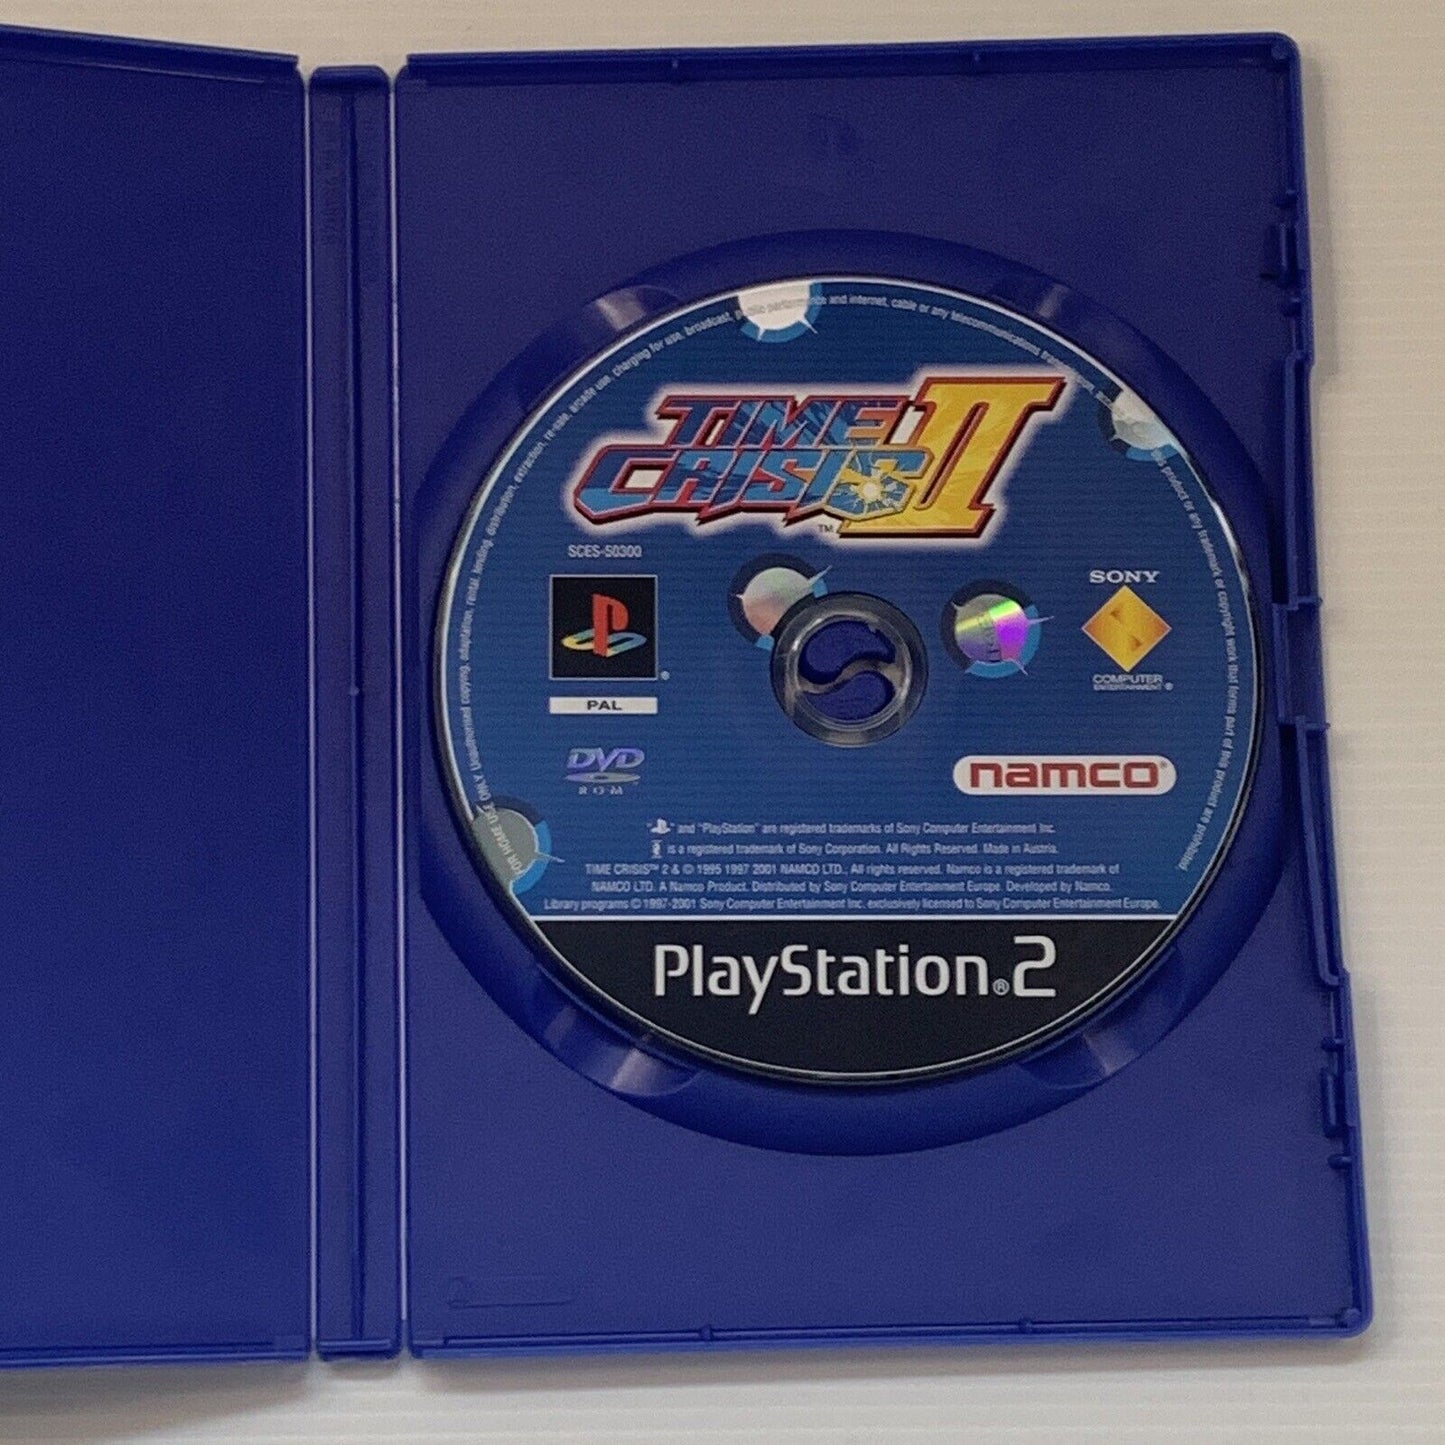 Time Crisis II 2 Playstation 2 PS2 Game